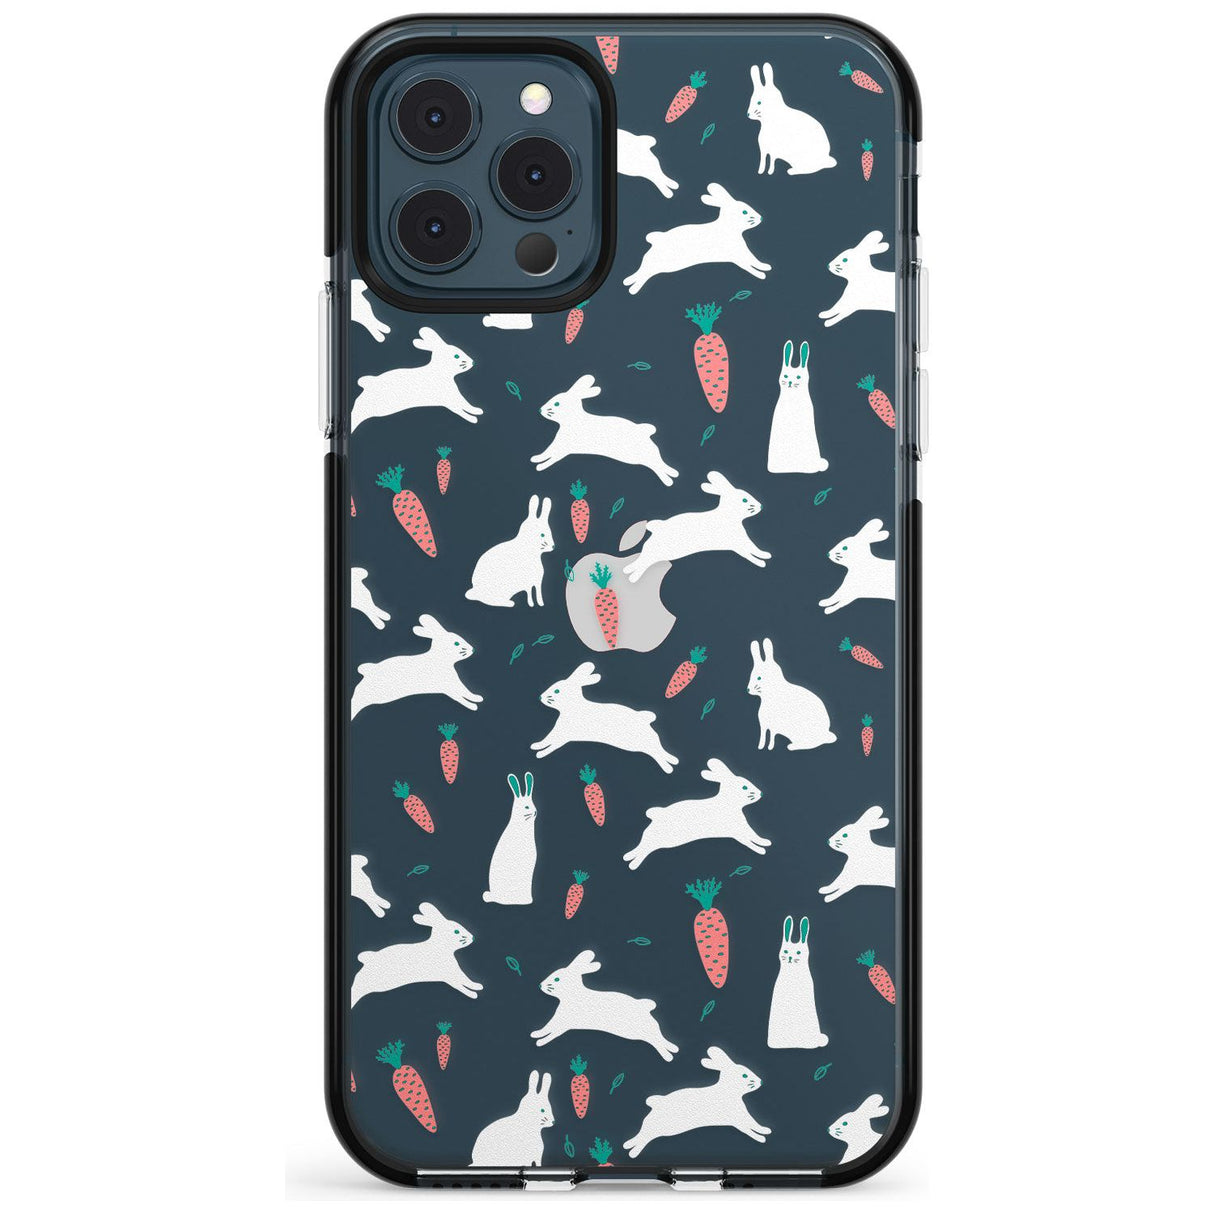 White Bunnies and Carrots Black Impact Phone Case for iPhone 11